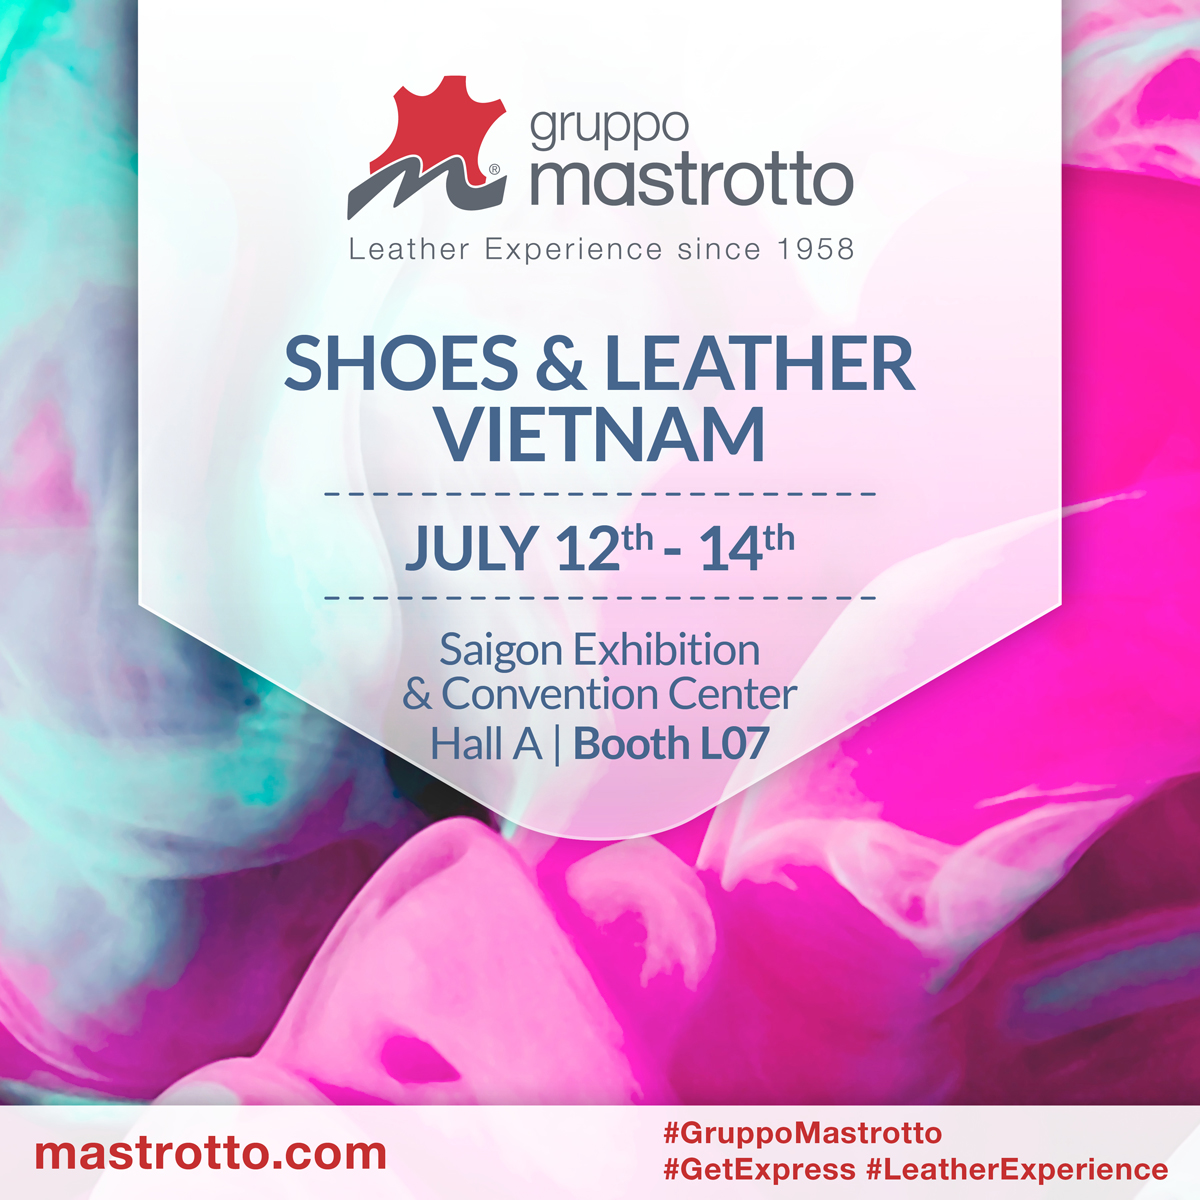 Mastrotto - Shoes&Leather Vietnam - July 12th-14th